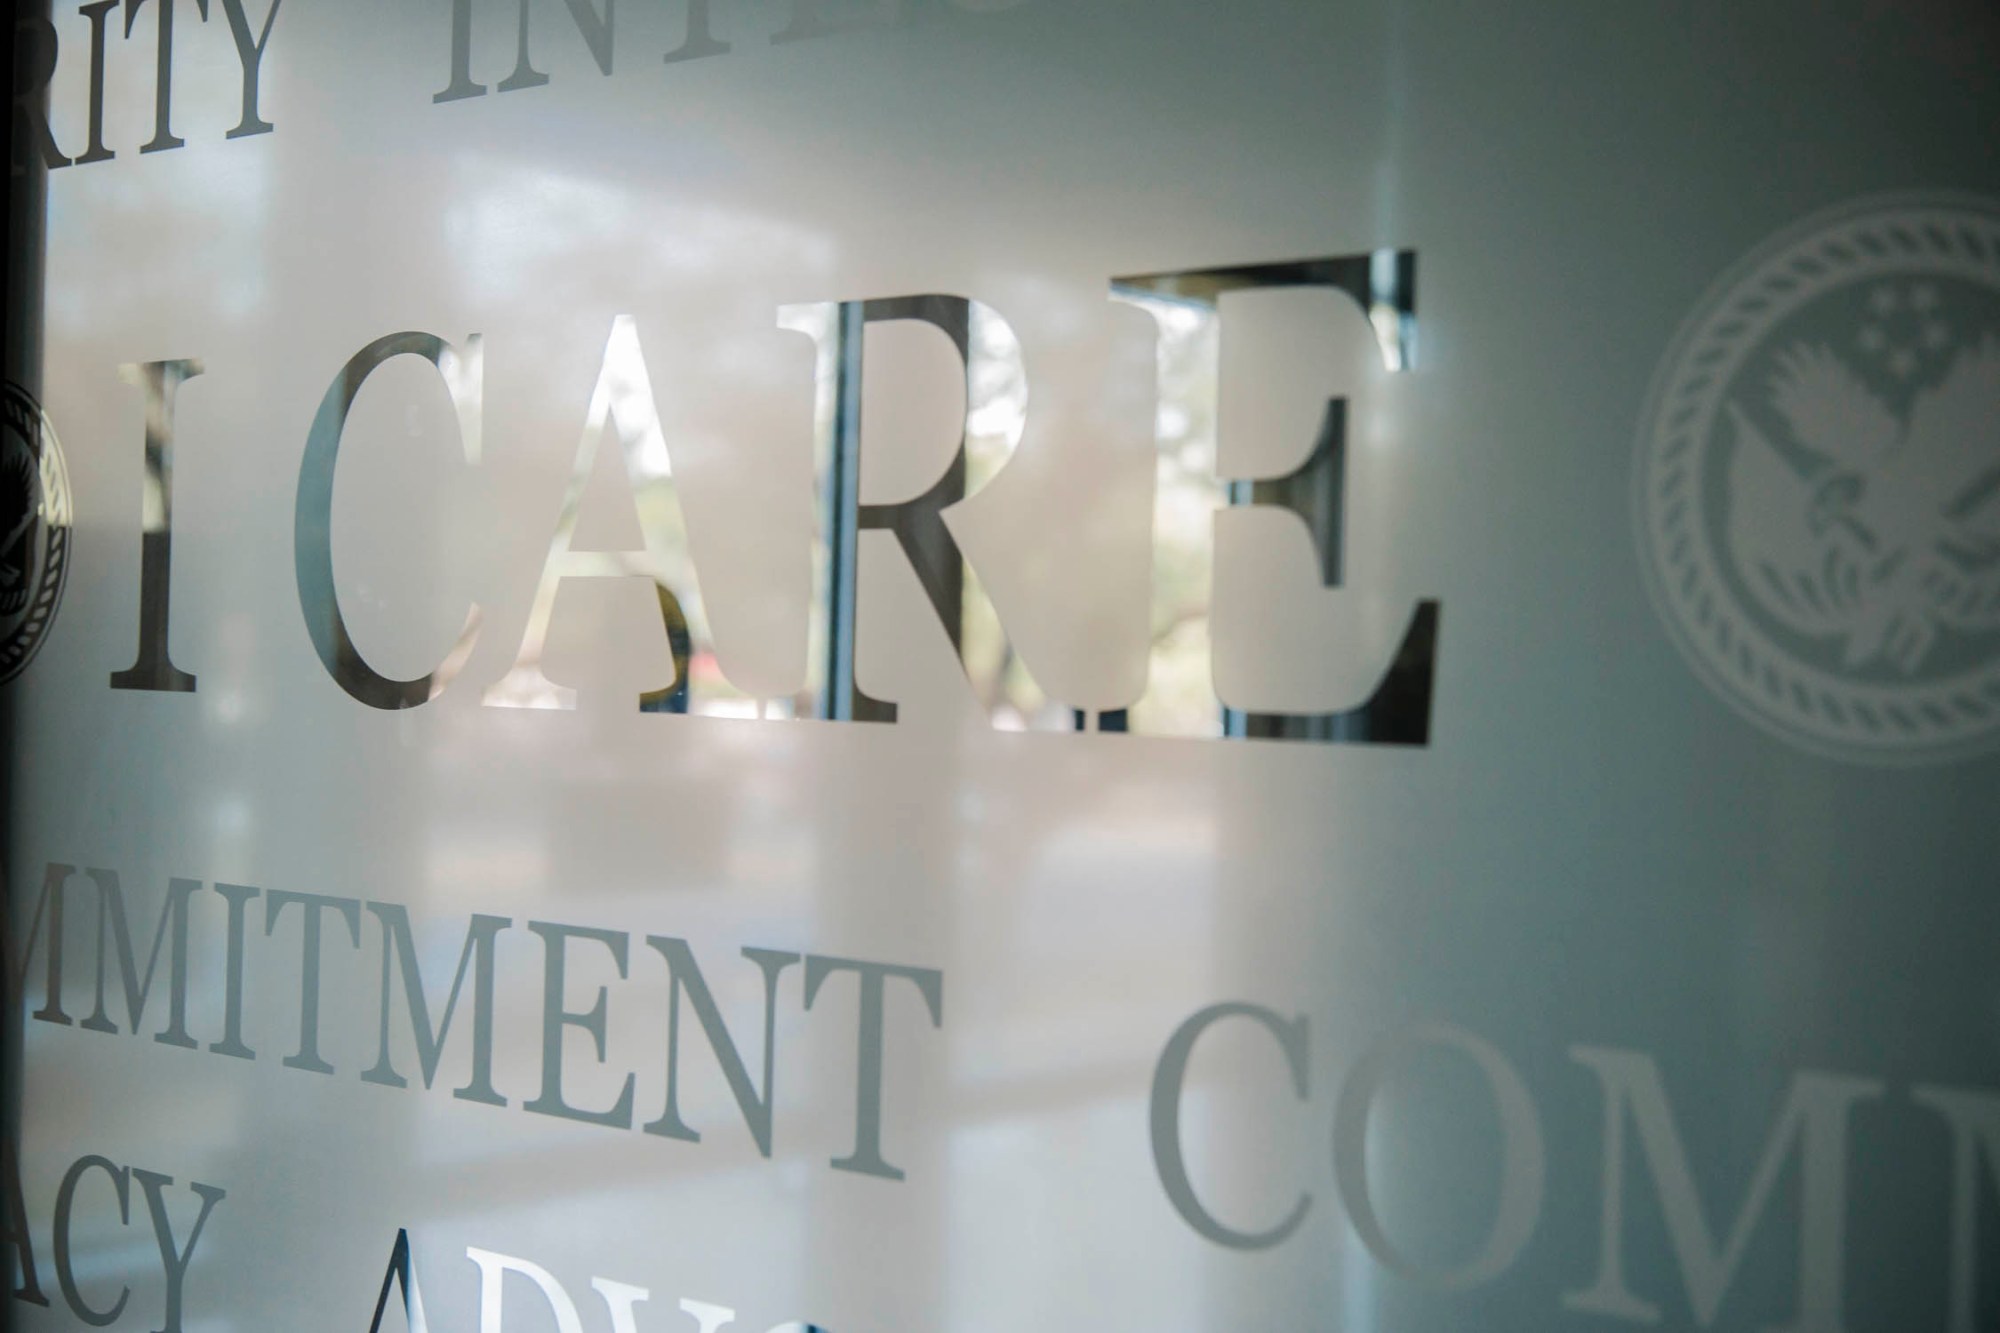 I CARE wording etched in glass.